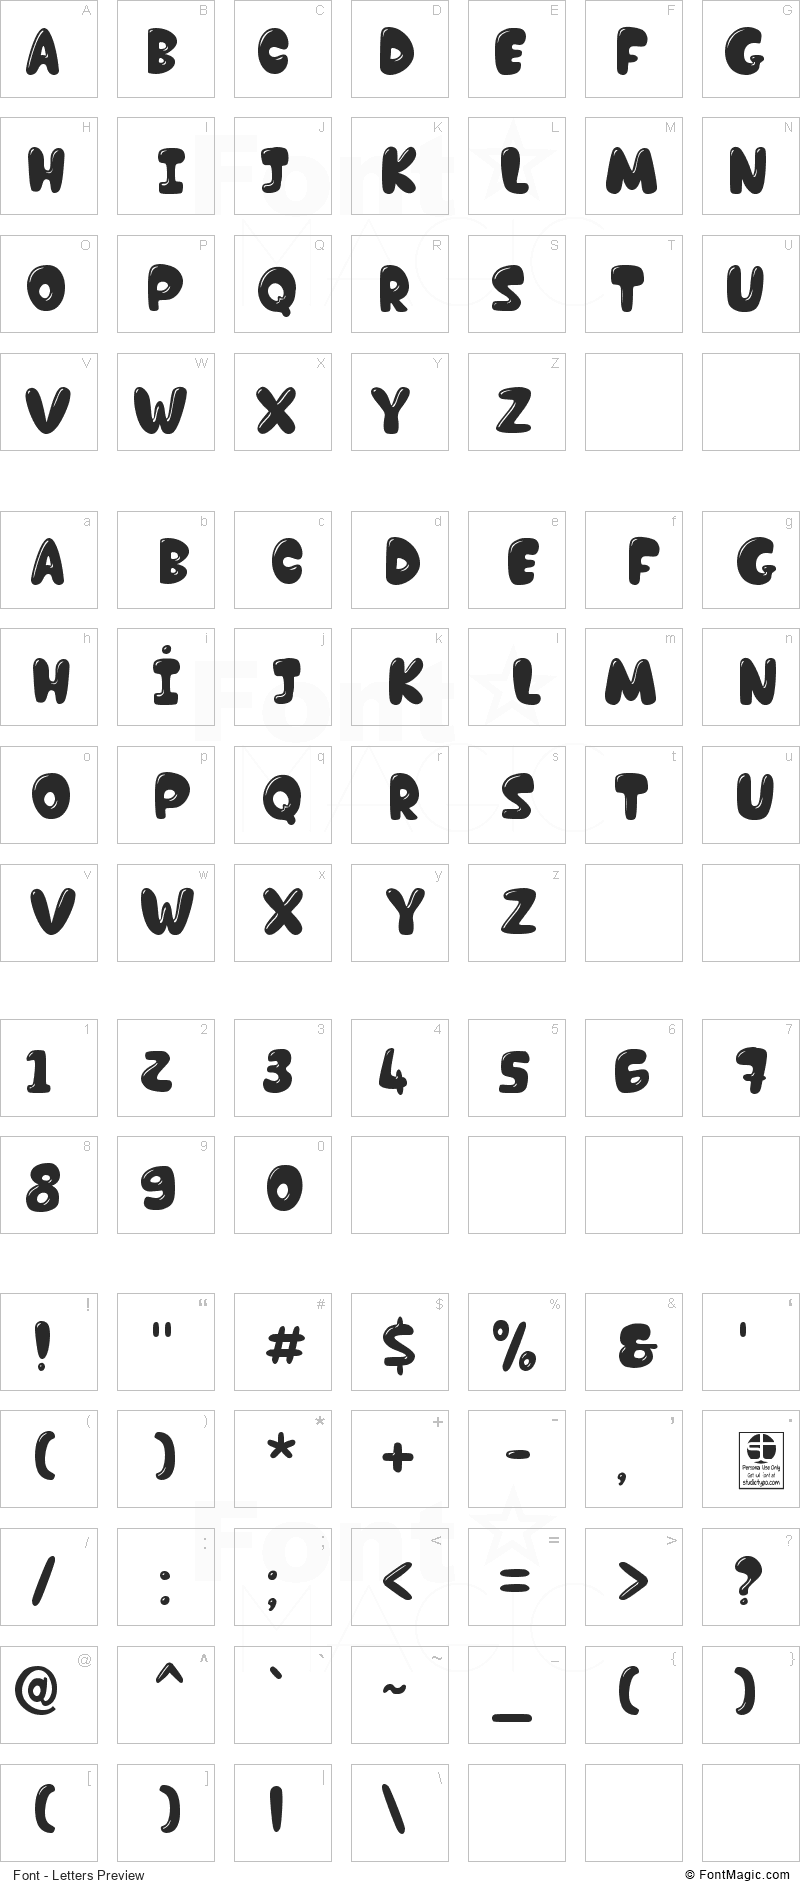 Chocolate Bar Font - All Latters Preview Chart